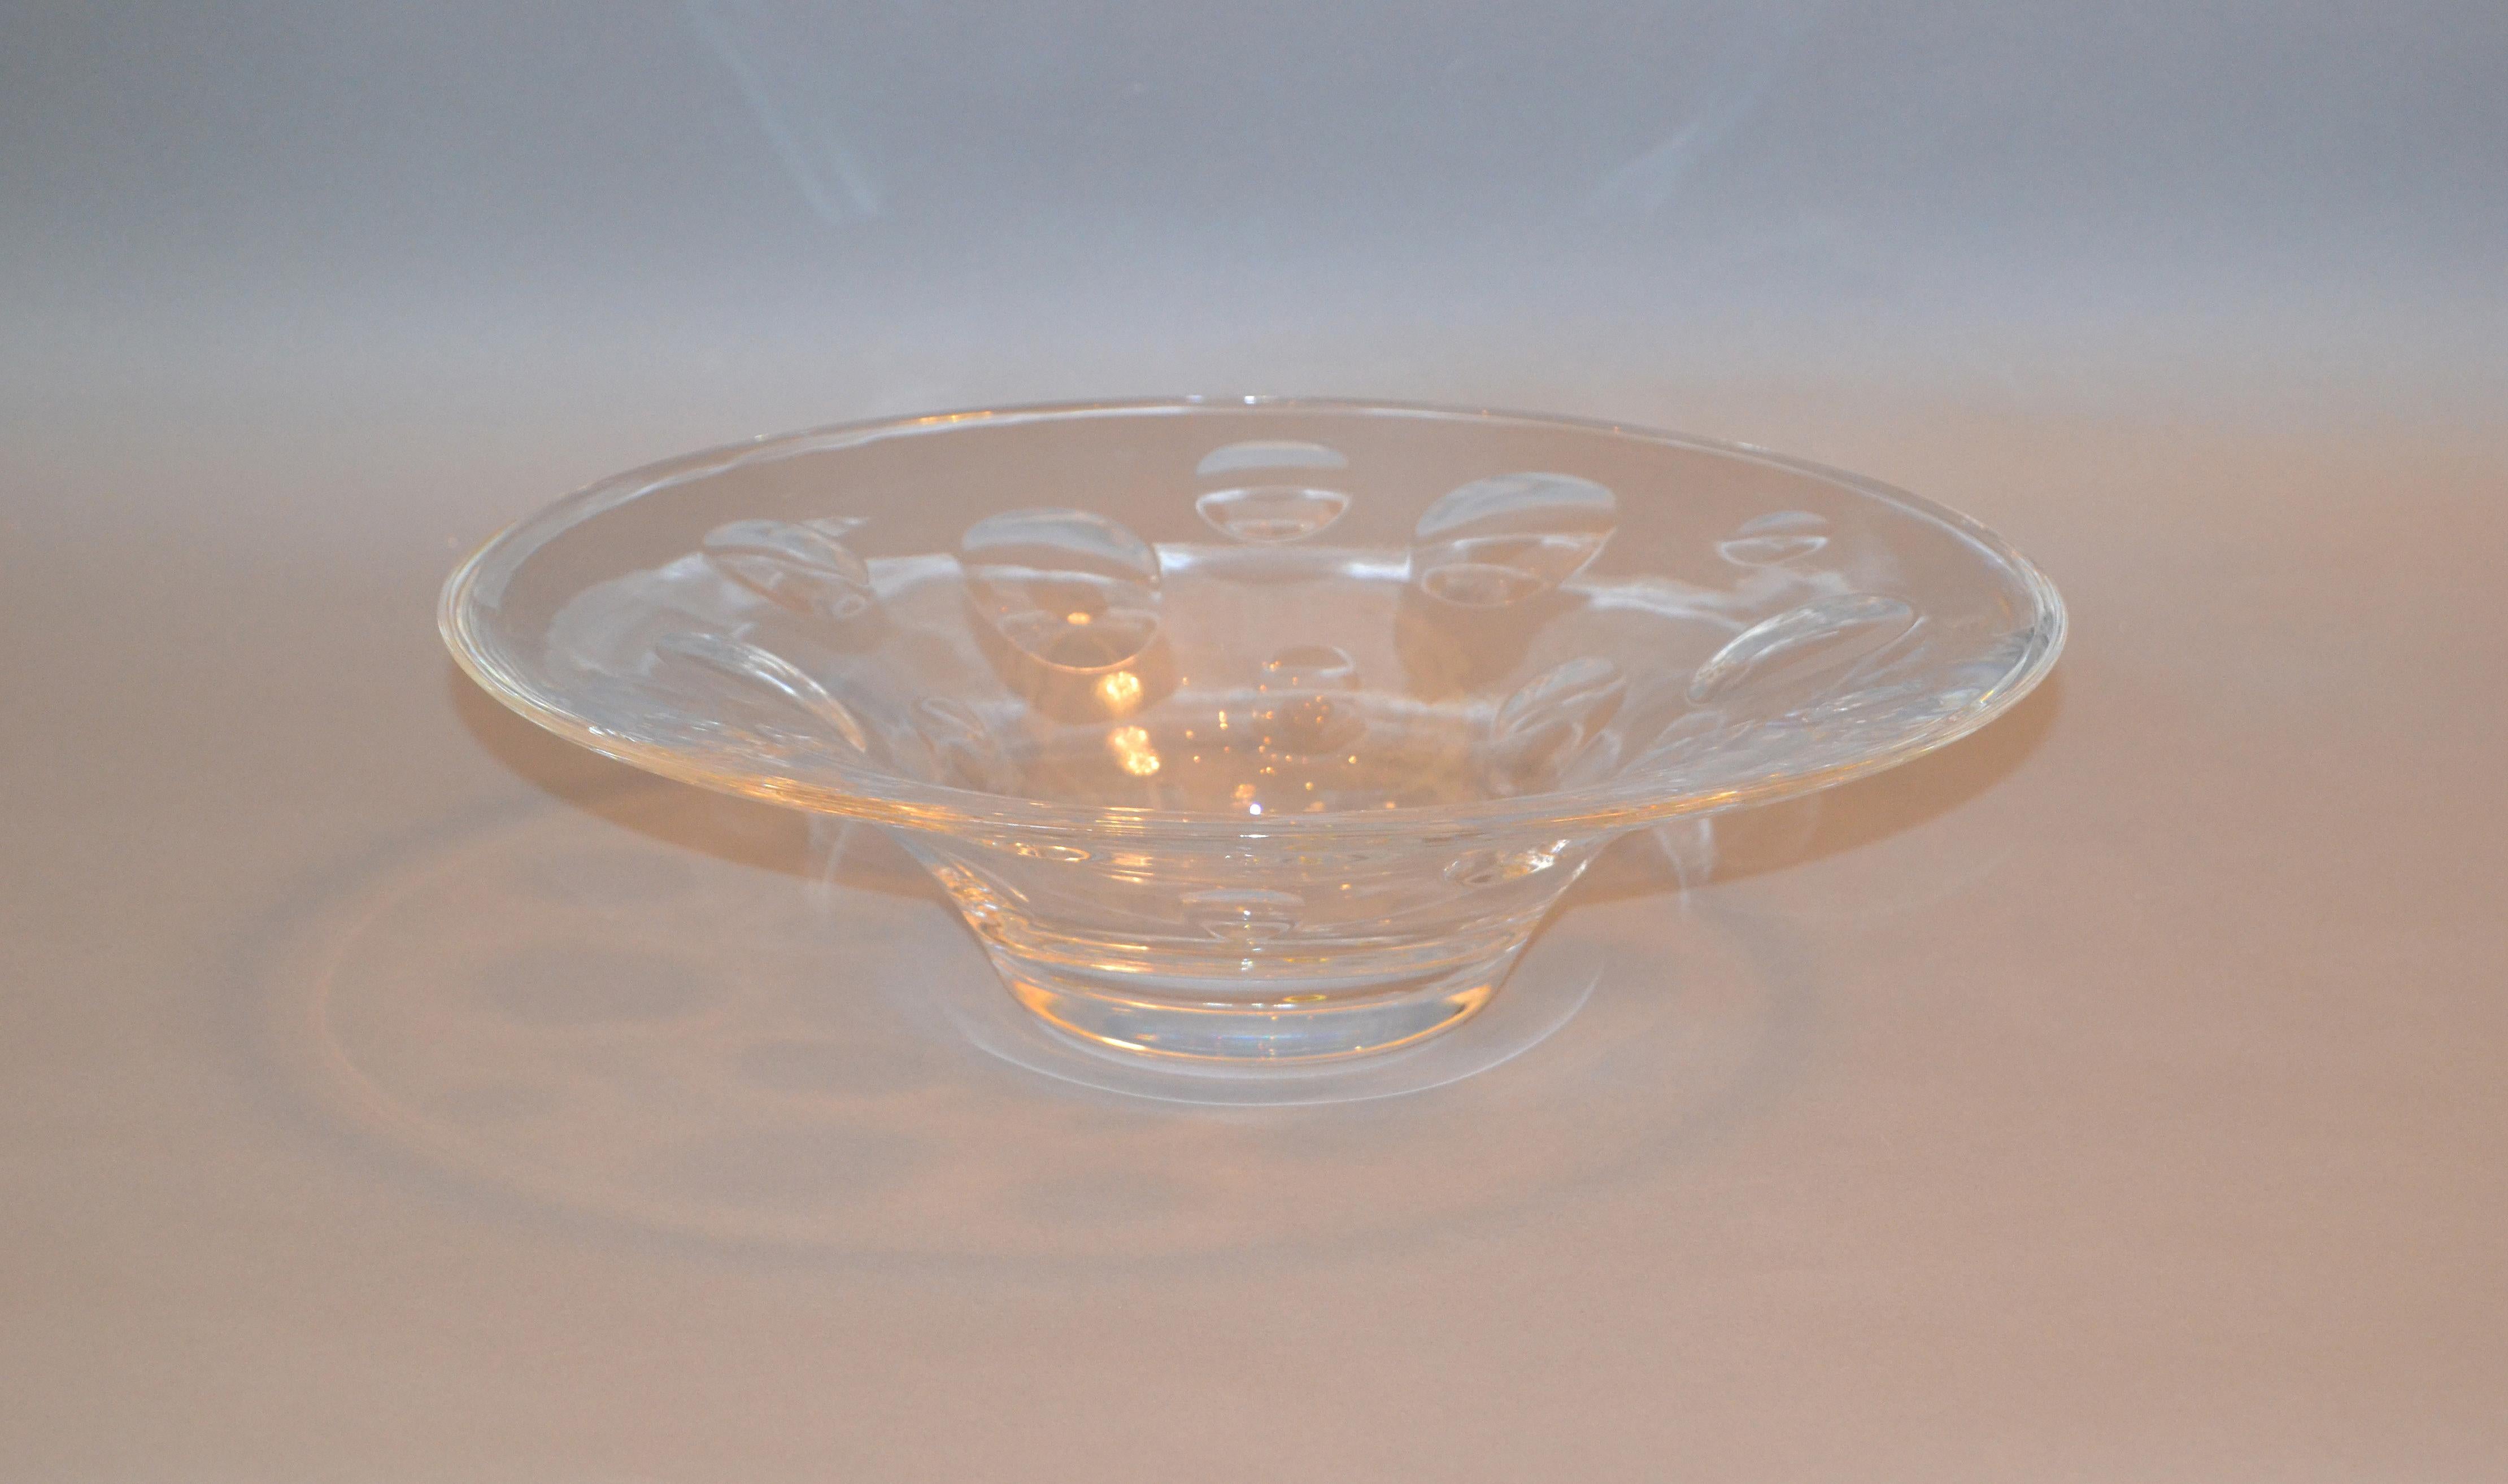 Mid-20th Century 1940s Art Deco Large Tiffany & Company Art Glass Crystal Bowl with Bubbles